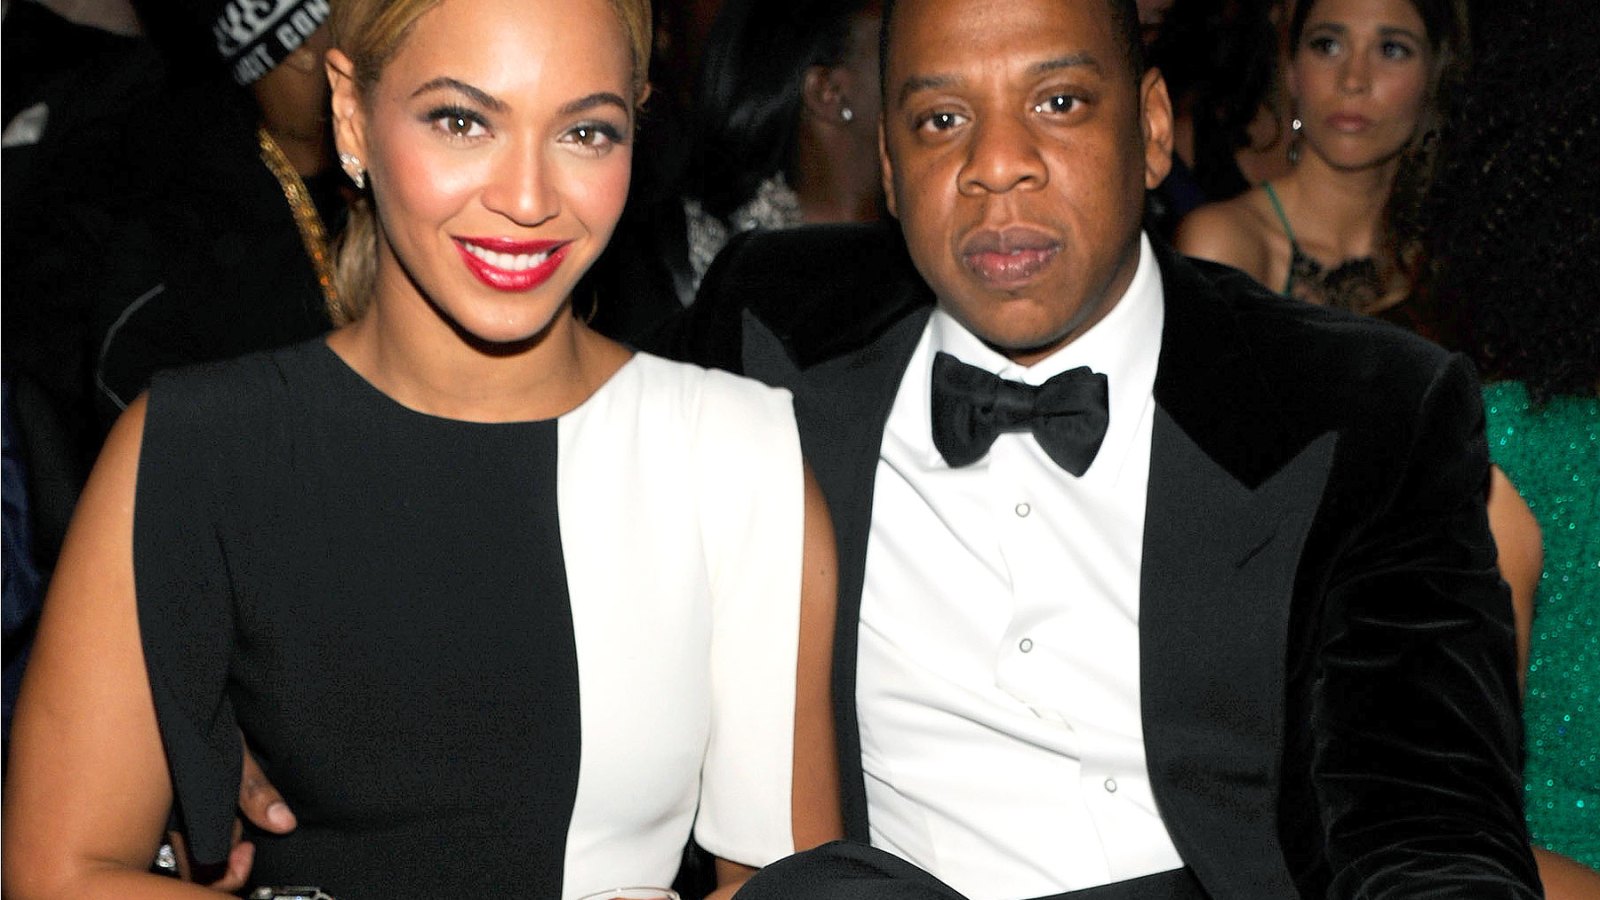 Beyonce and Jay Z at the 2013 Grammys